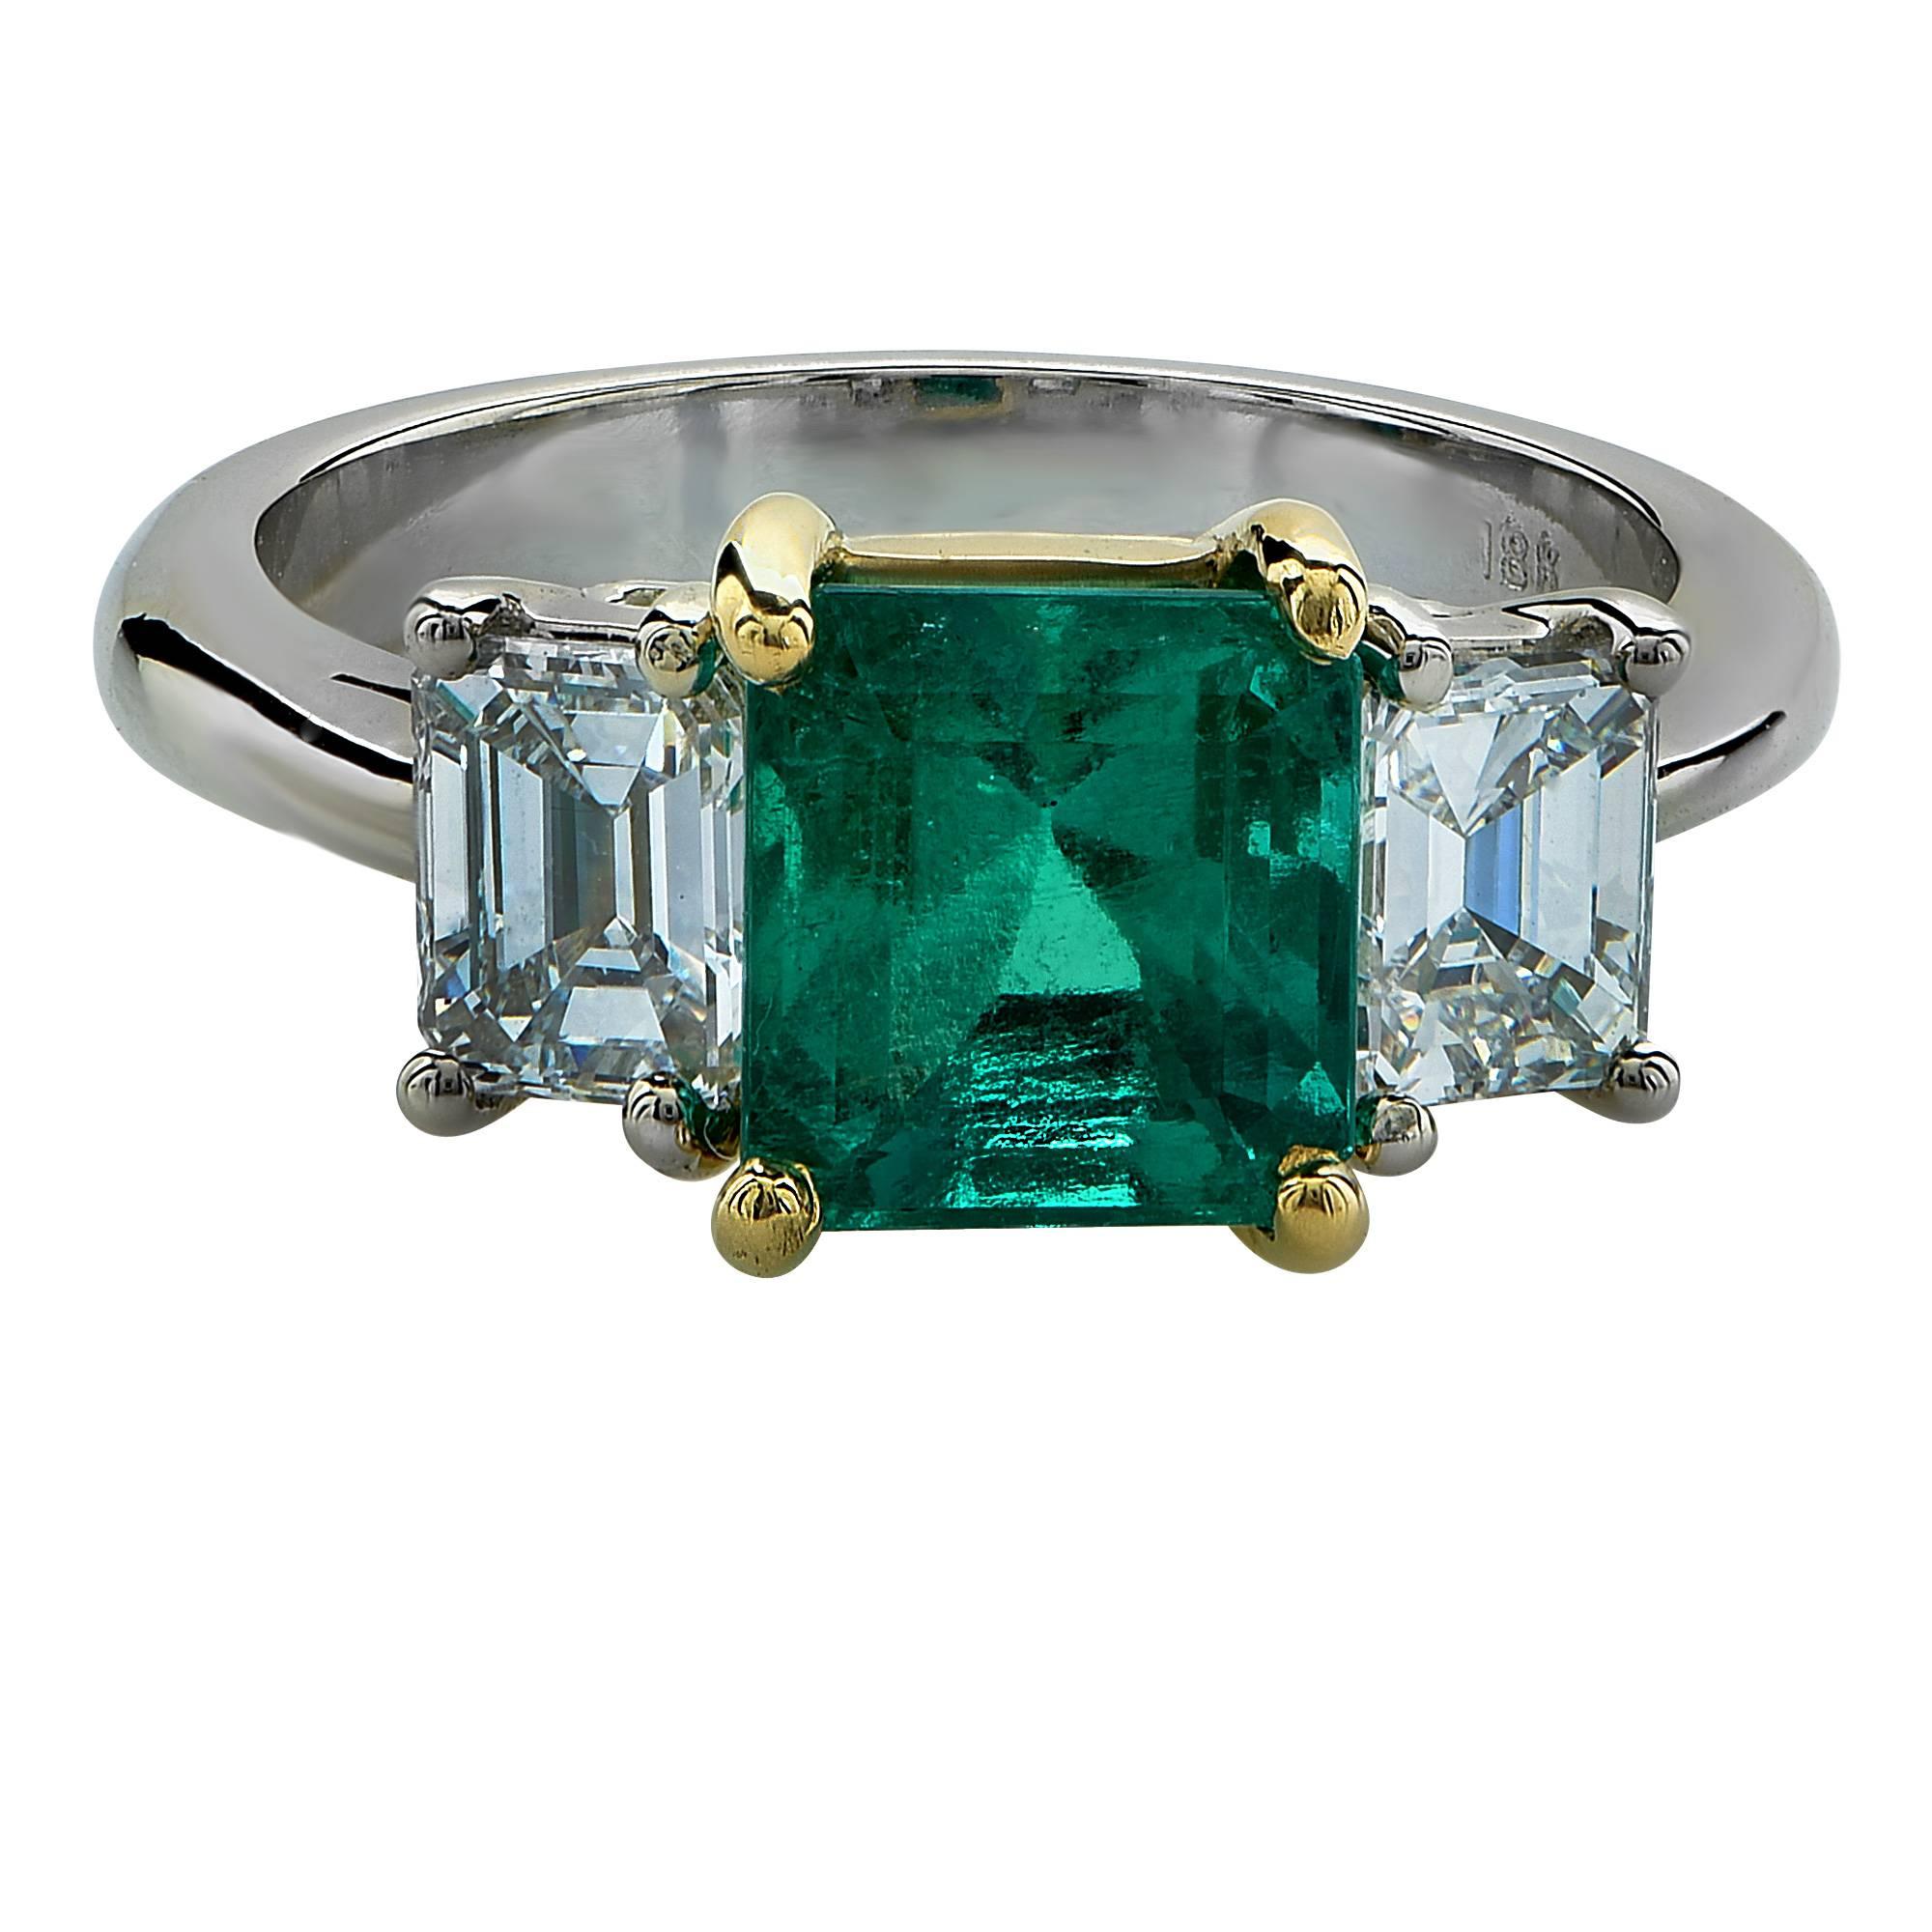 This stunning emerald and diamond ring features a 2.13ct GIA graded emerald accented by two gorgeous emerald cut diamonds weighting 1.05cts total, F color, VS1 clarity.

Ring size: 6 (can be sized up or down free of charge)
Metal weight: 5.28